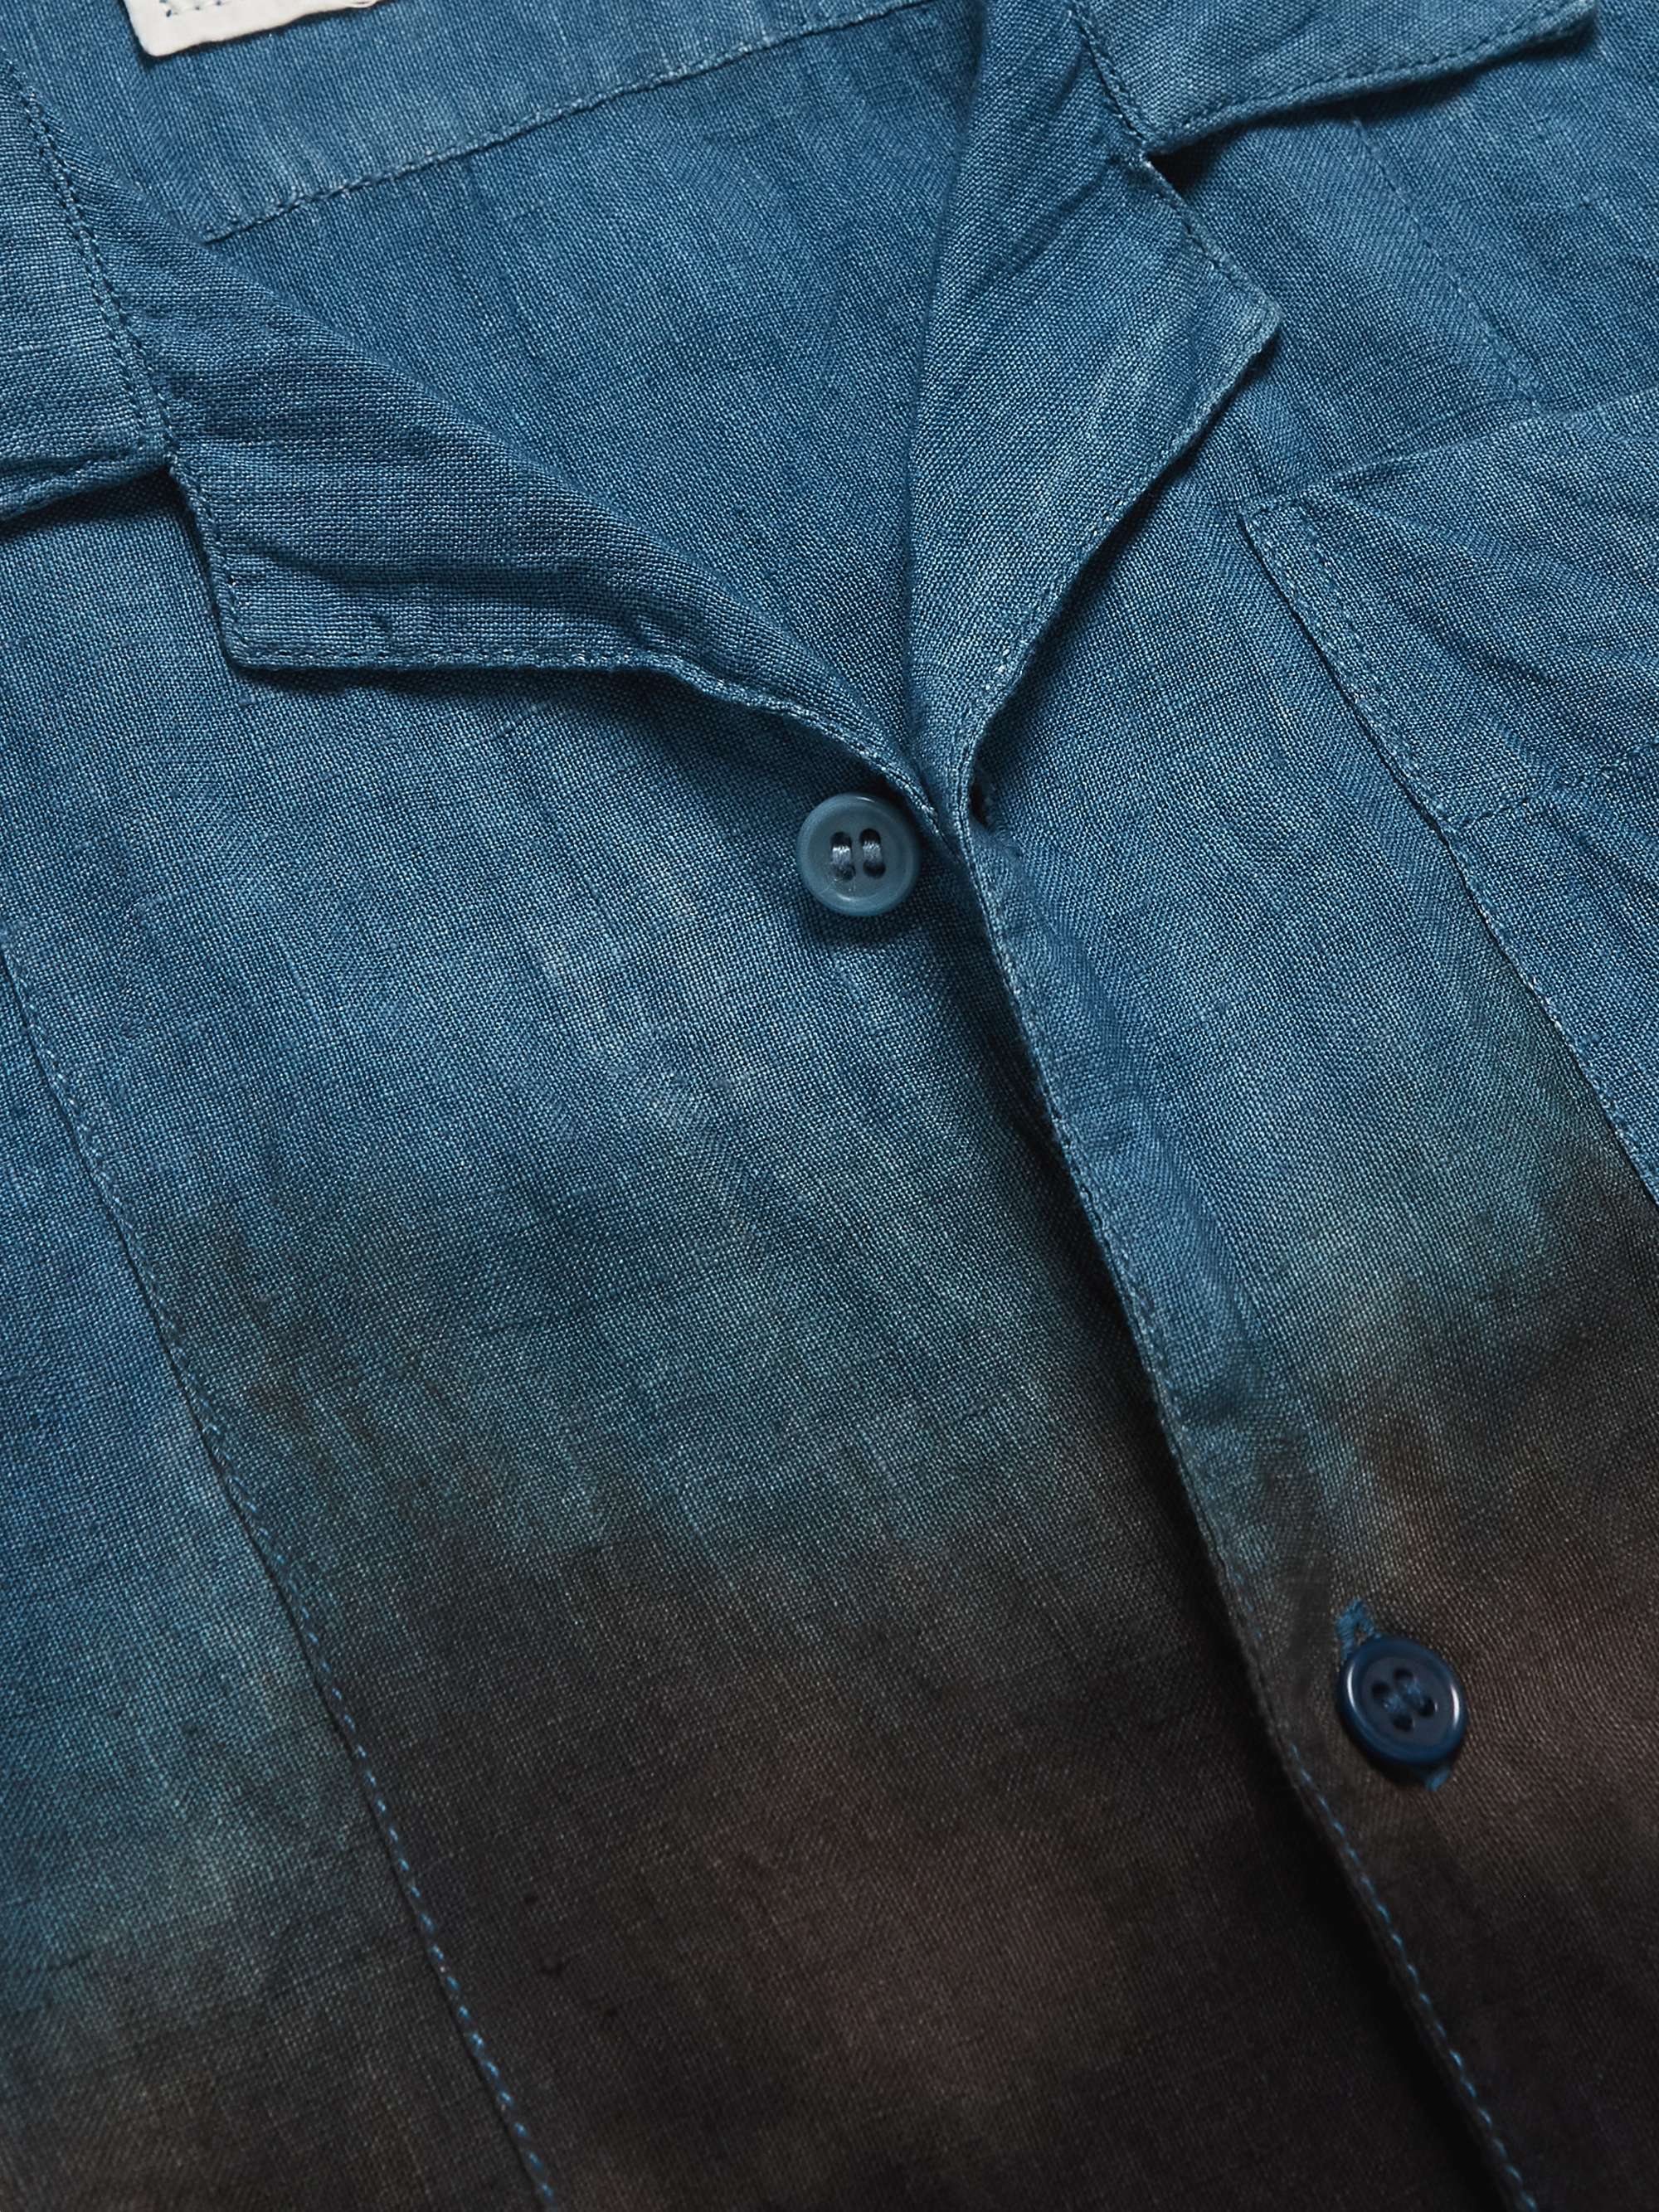 STORY MFG. Greetings Camp-Collar Embroidered Garment-Dyed Organic Linen Shirt